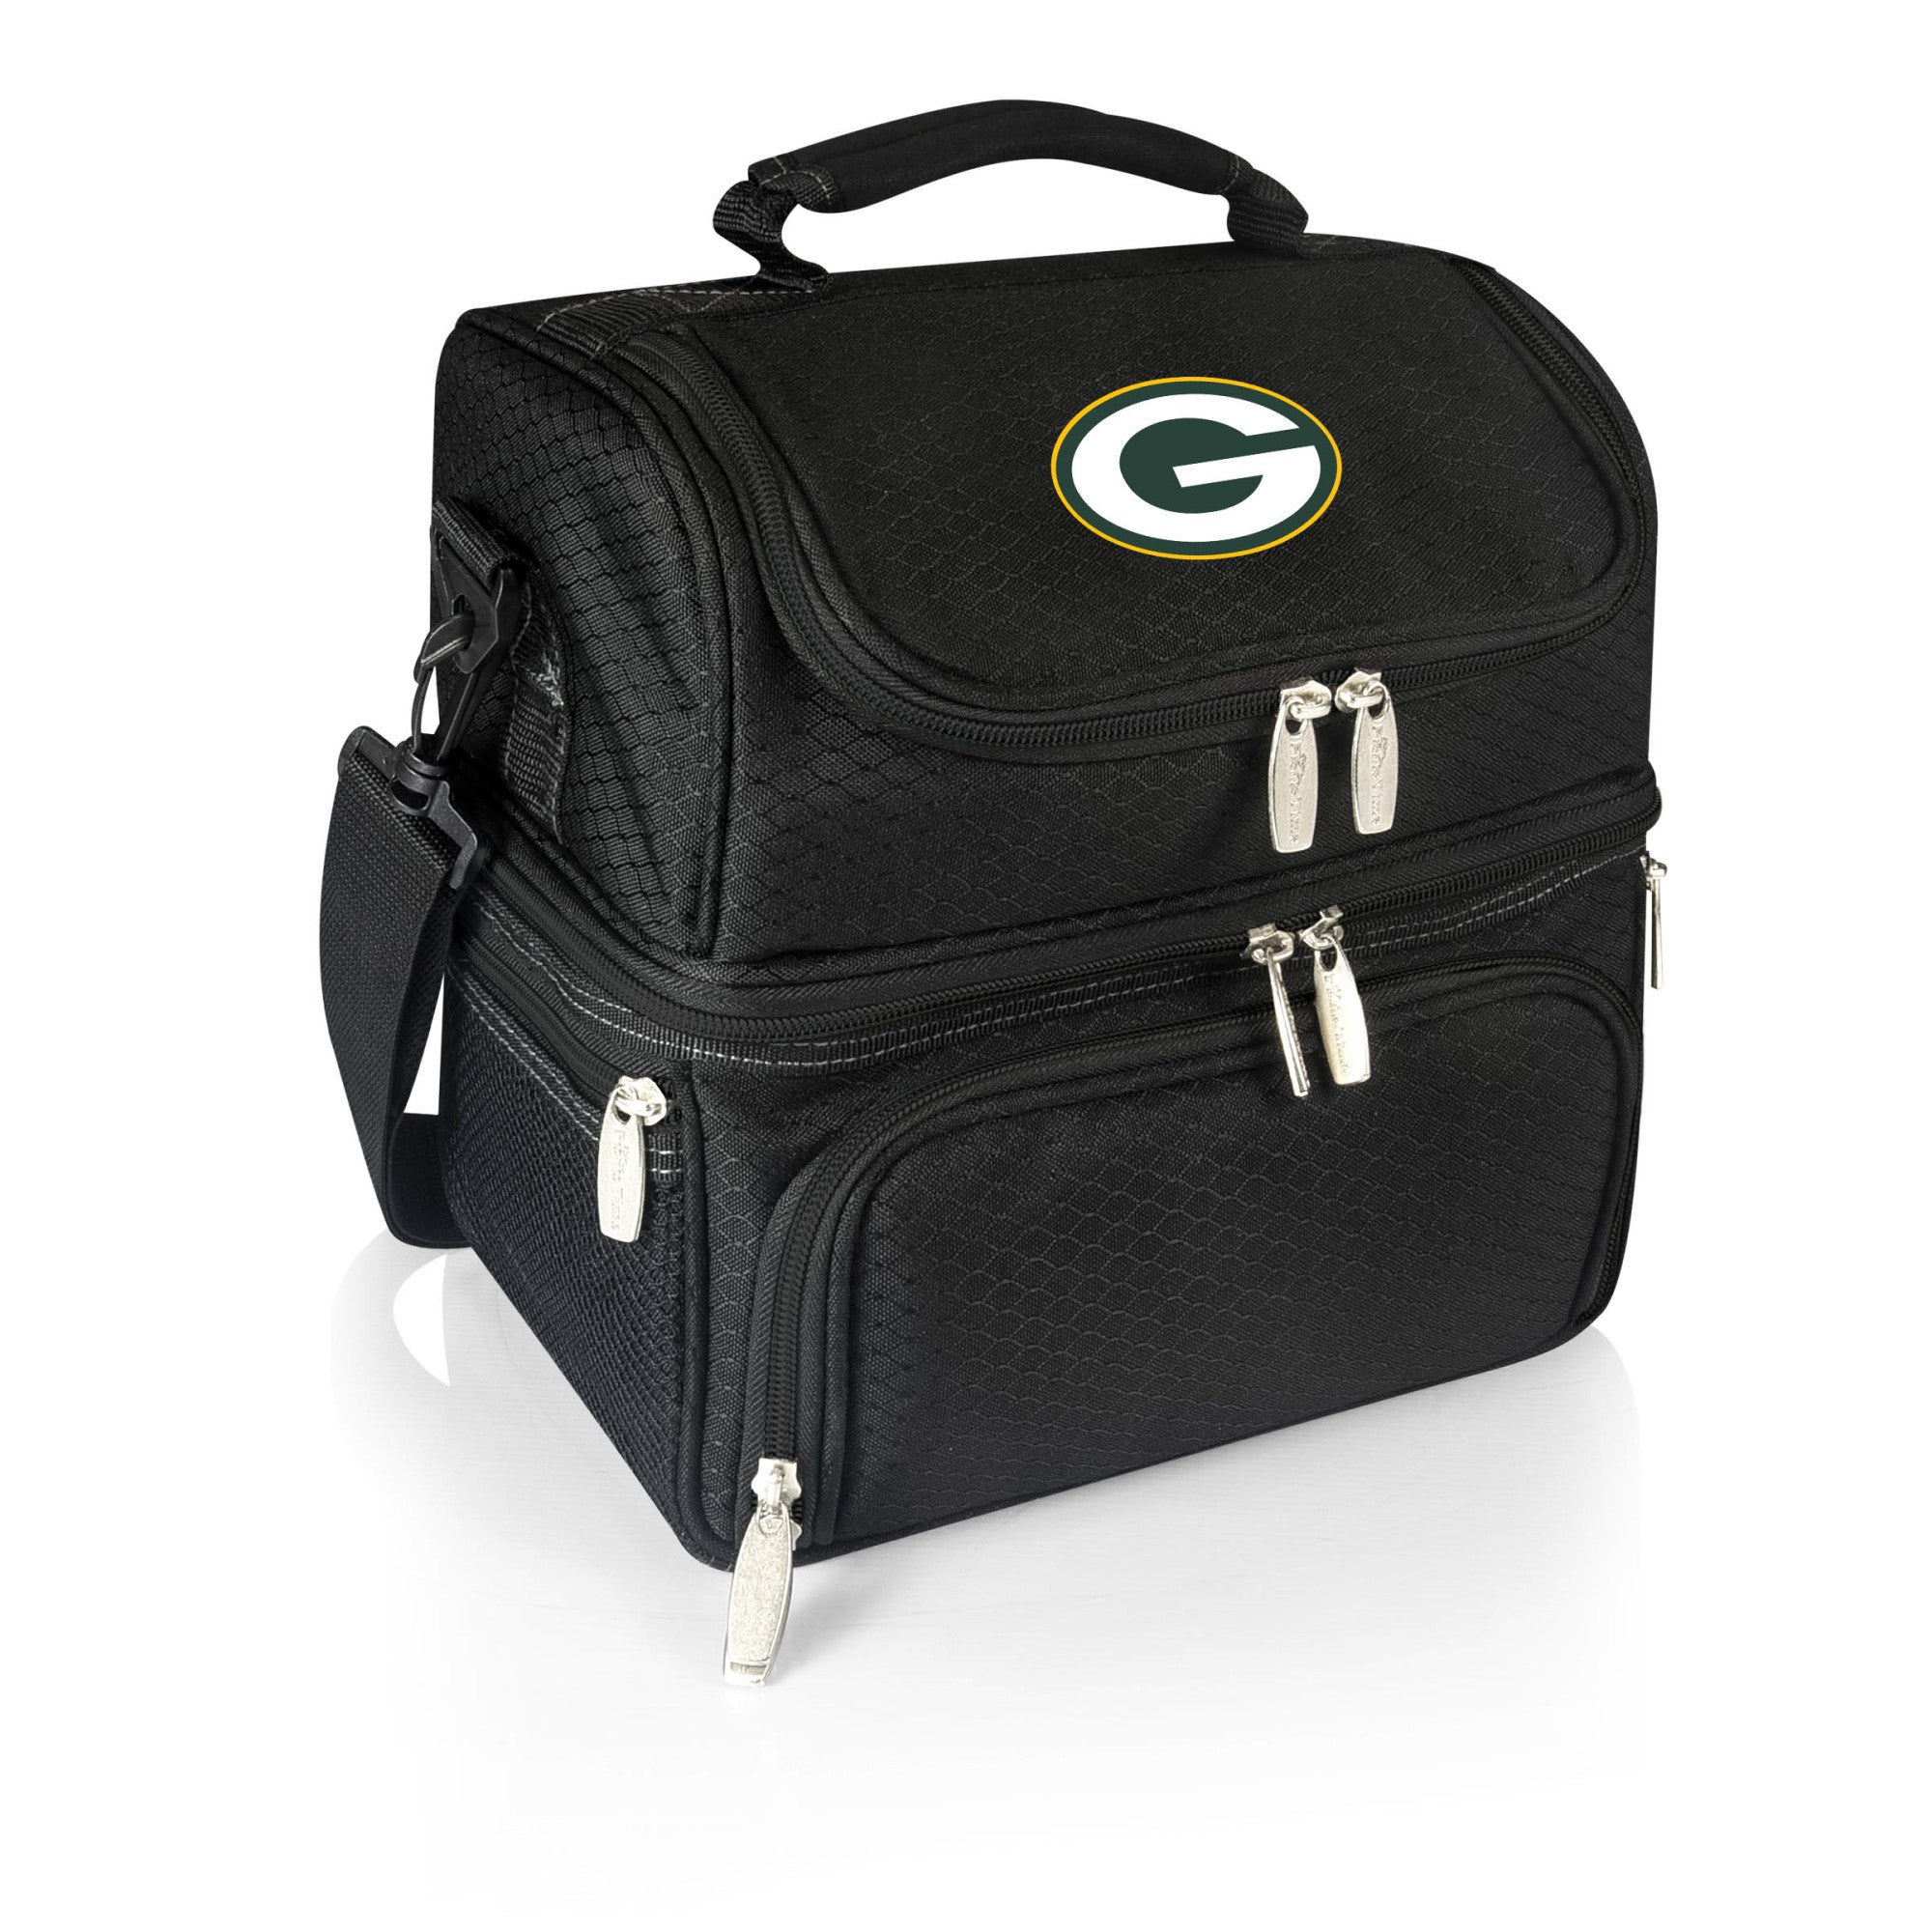 Green Bay Packers - Pranzo Lunch Bag Cooler with Utensils